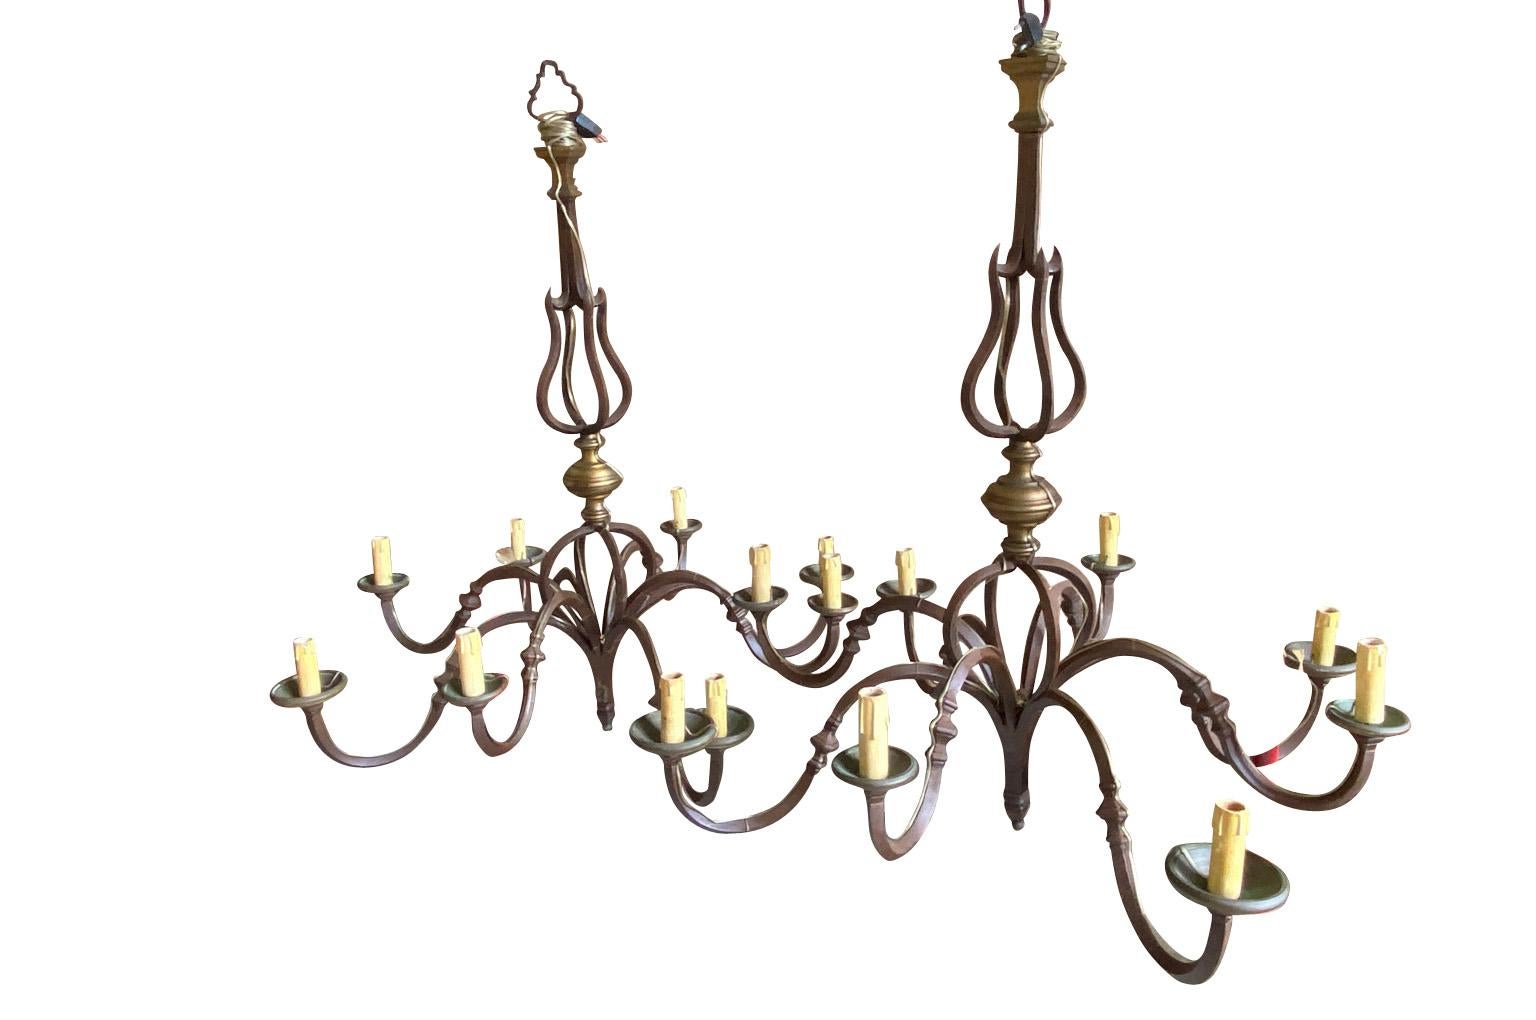 A stunning pair of 17th century Chandeliers from Lombardy region of Italy.  Beautifully crafted from iron and bronze with 8 lights each.  Elegant and understated with excellent patina.